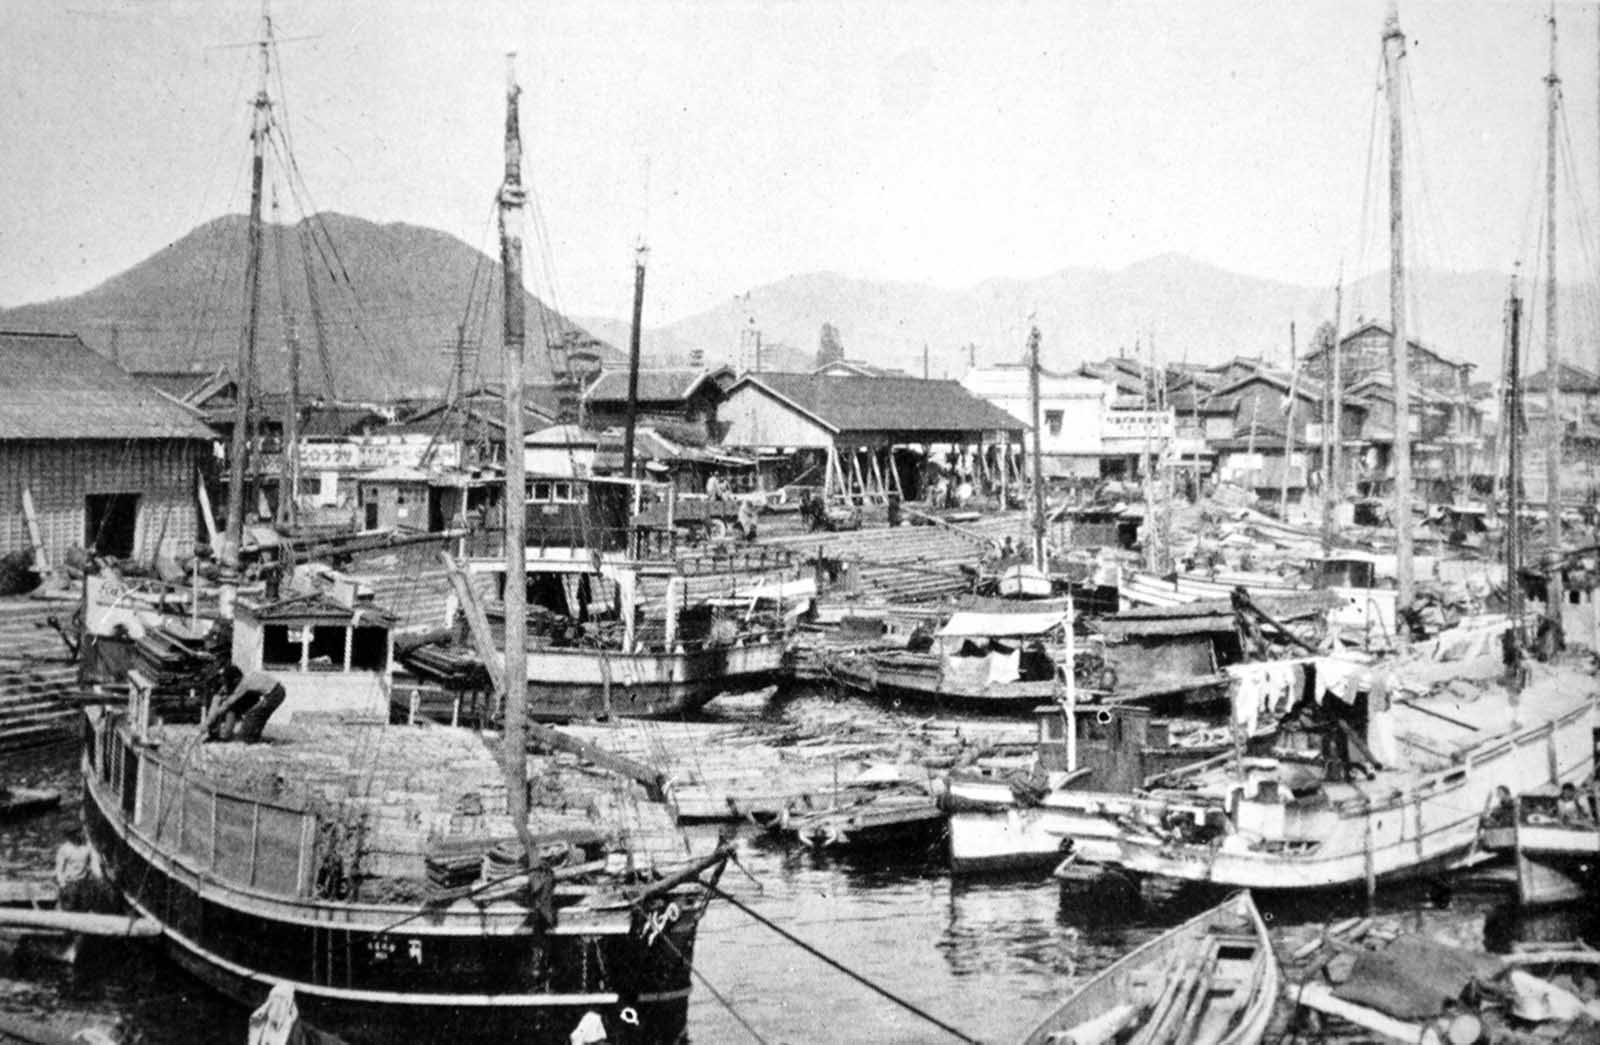 A pre-war photo of Ujina Harbor. This relatively small harbor was developed as the port for Hiroshima and was one of the principal embarkation depots for the Japanese Army during World War II.